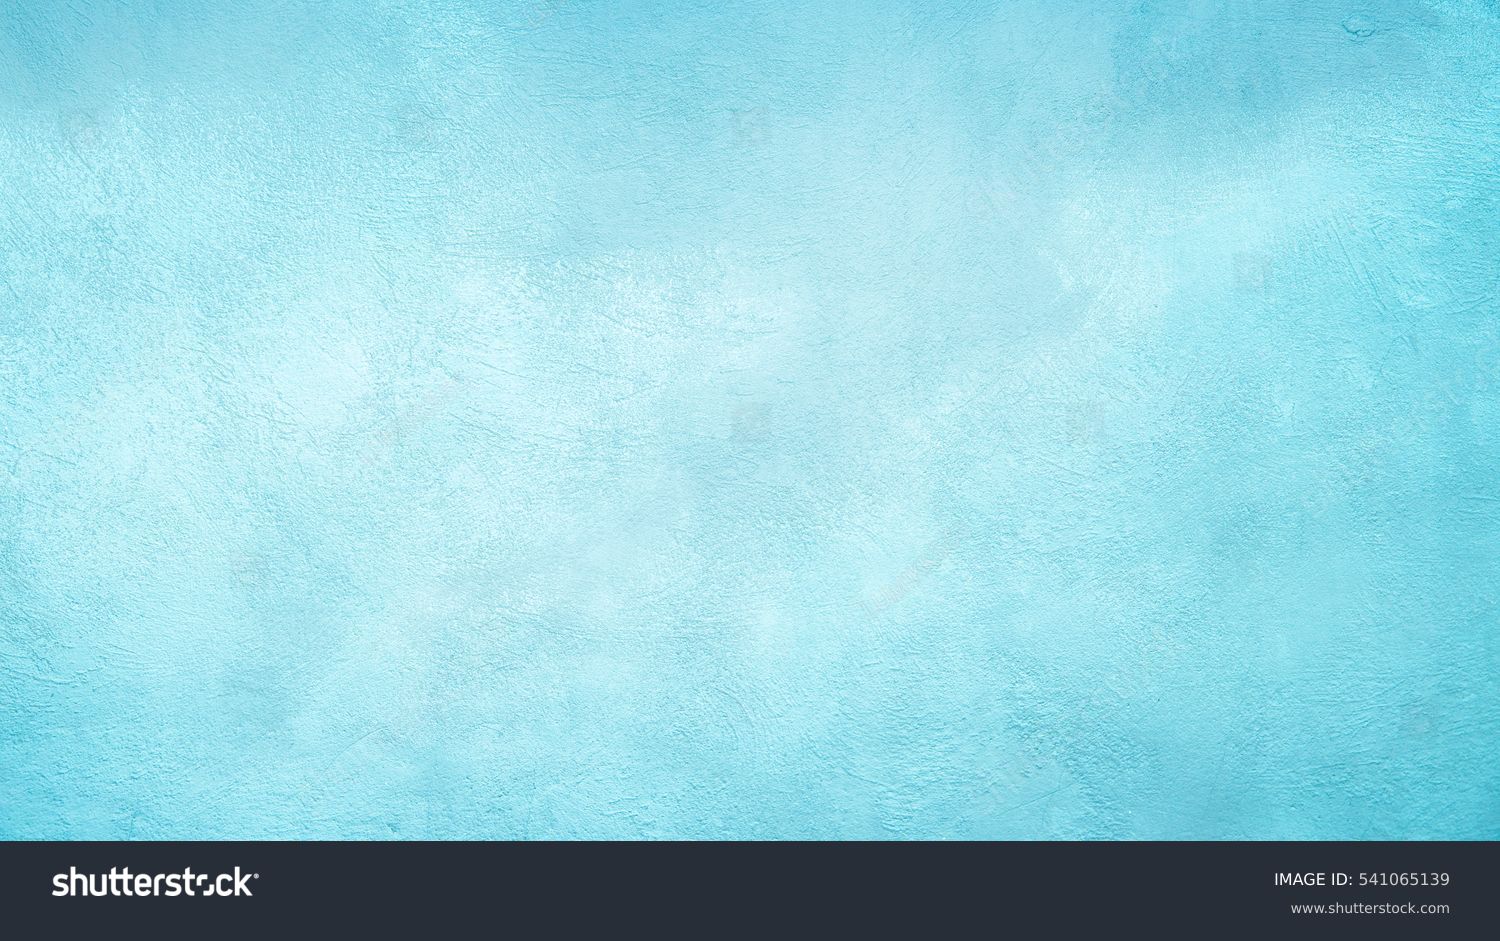 Beautiful Abstract Grunge Decorative Light Blue Cyan Painted Stucco Wall Texture. Handmade Rough Winter Christmas Paper Wide Background With Copy Space #541065139